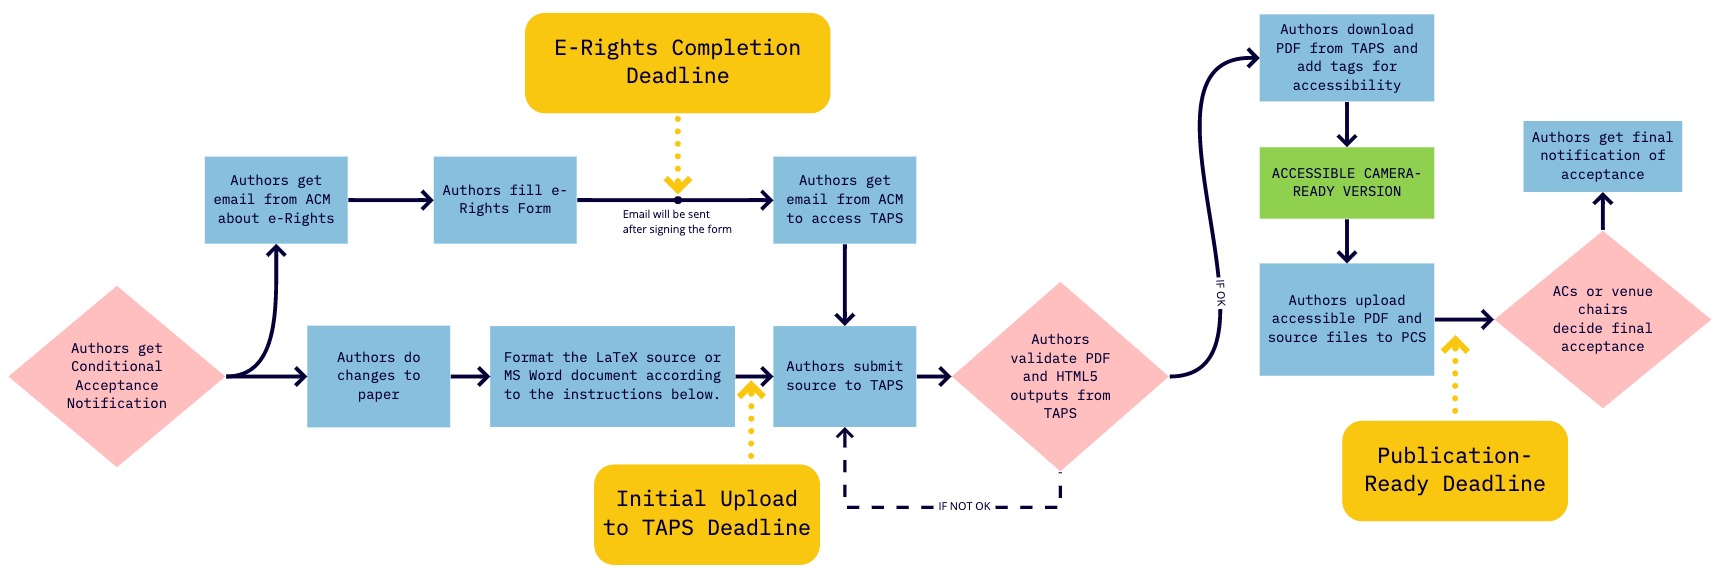 A flow diagram detailing the different steps (explained in the next paragraph) in the publication process from conditional acceptance to final acceptance.